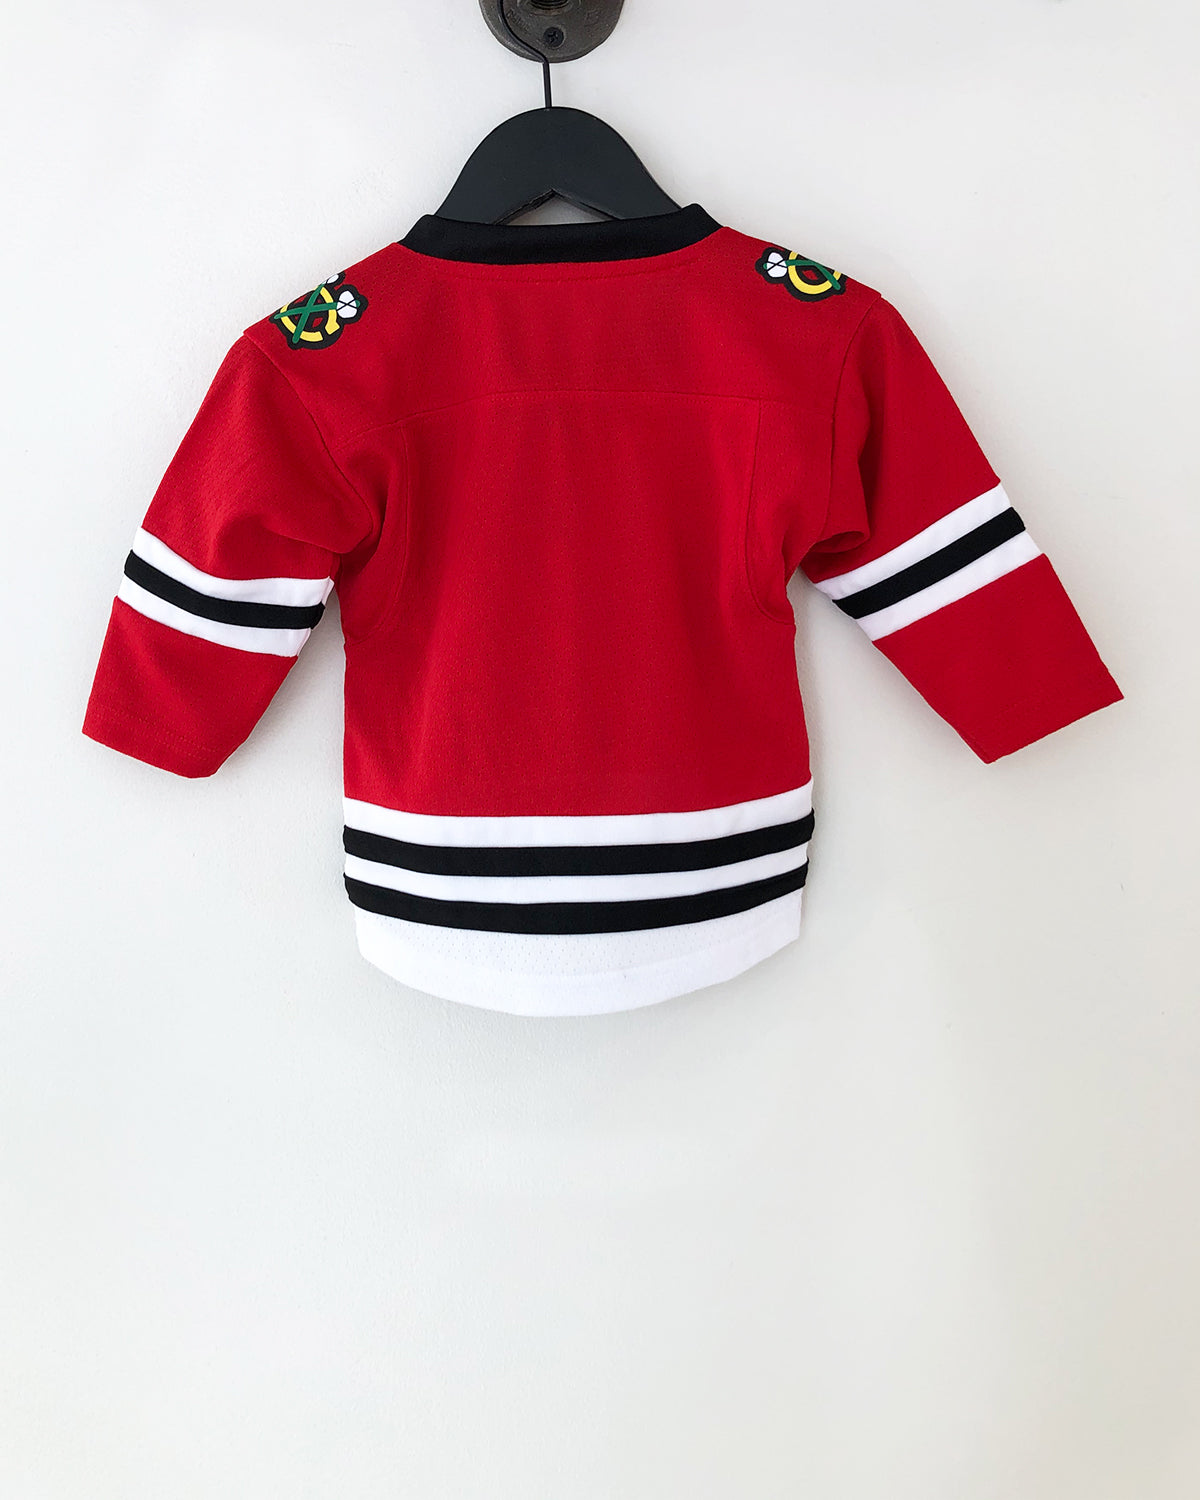 Chicago Blackhawks - ⚫️⚪️⚫️𝐒𝐮𝐫𝐩𝐫𝐢𝐬𝐞⚫️⚪️⚫️ Alternate jersey dates  coming at noon!